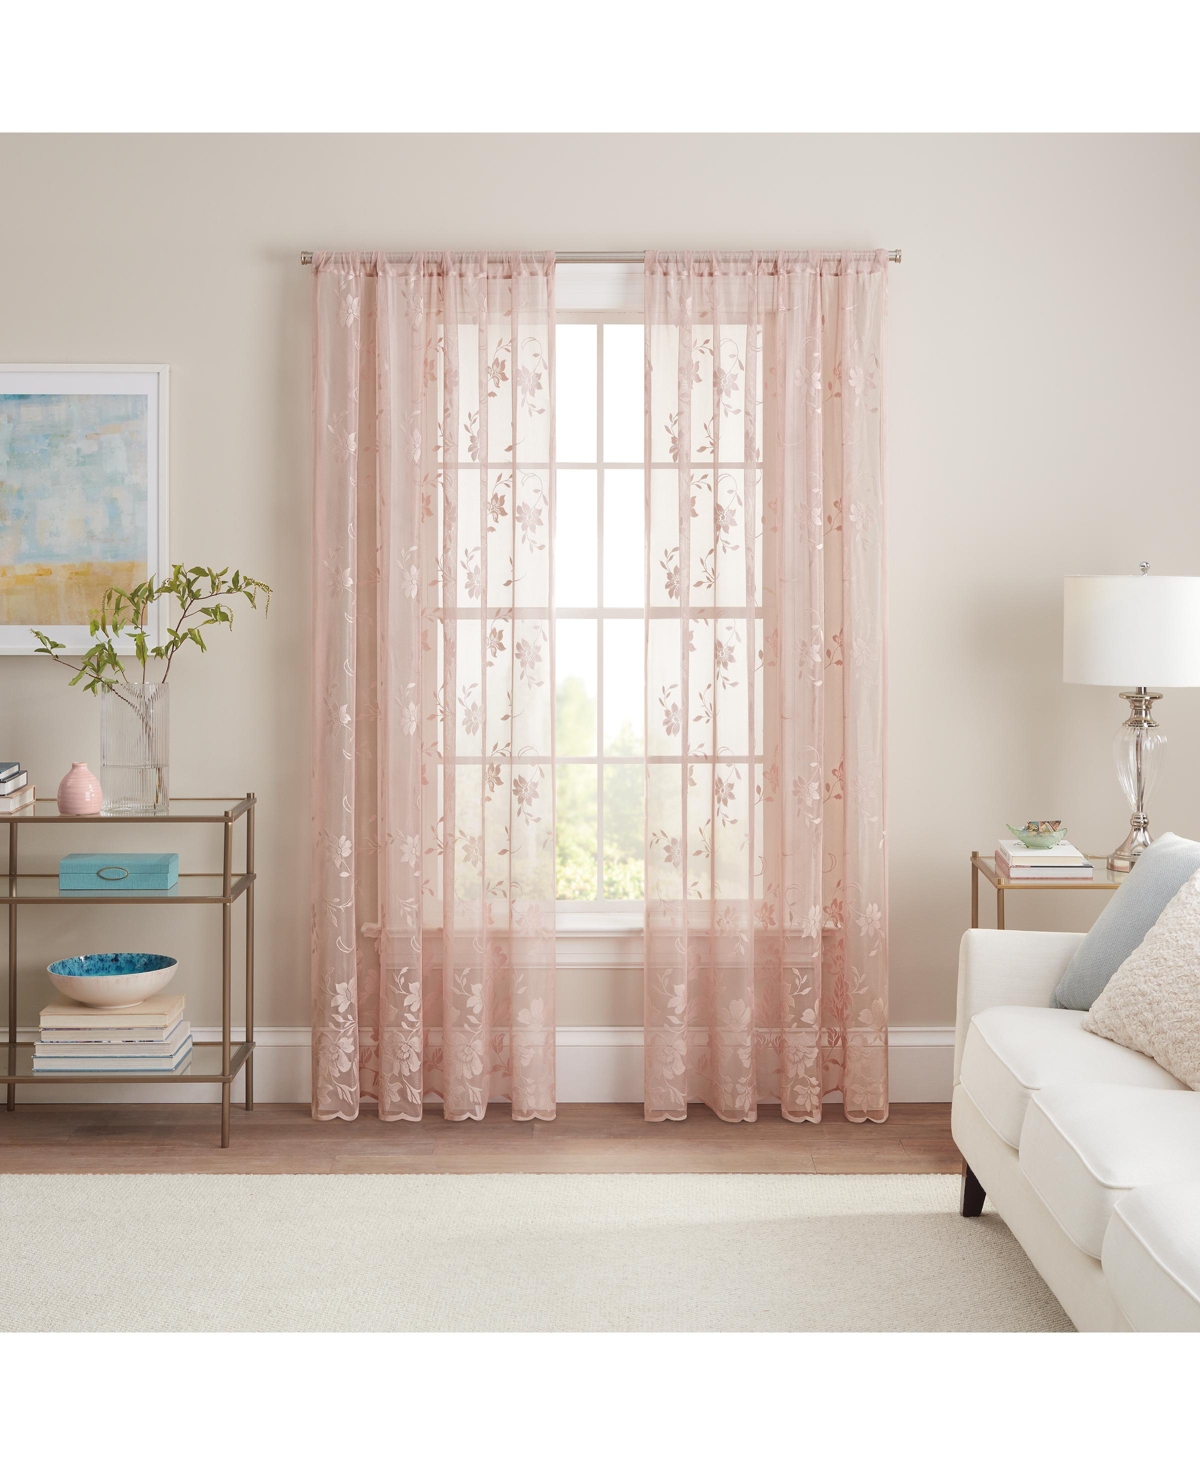 Waverly Sherry Floral Lace Sheer Rod Pocket Curtain Panel, 54" X 63" In Blush